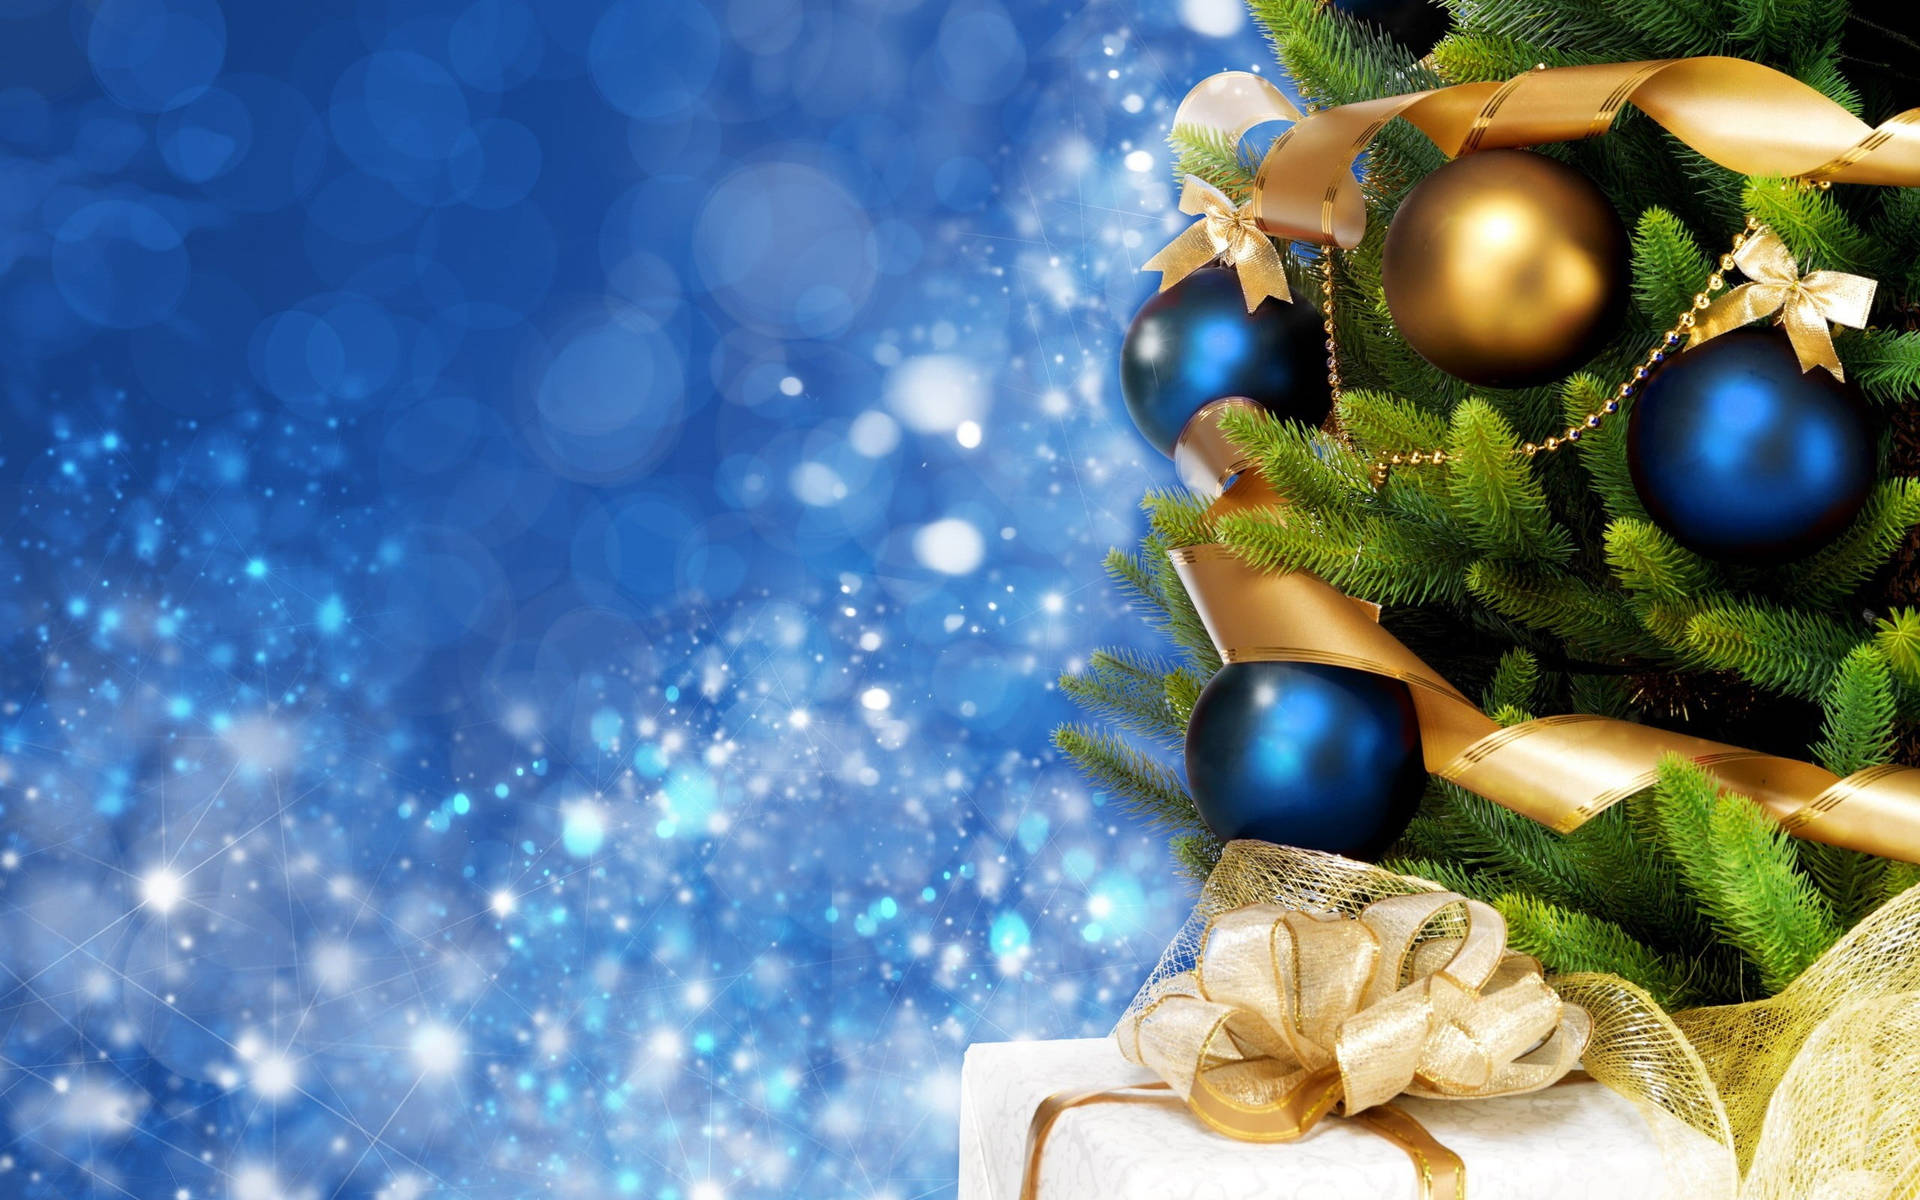 Blue And Gold Christmas Balls Background Wallpaper